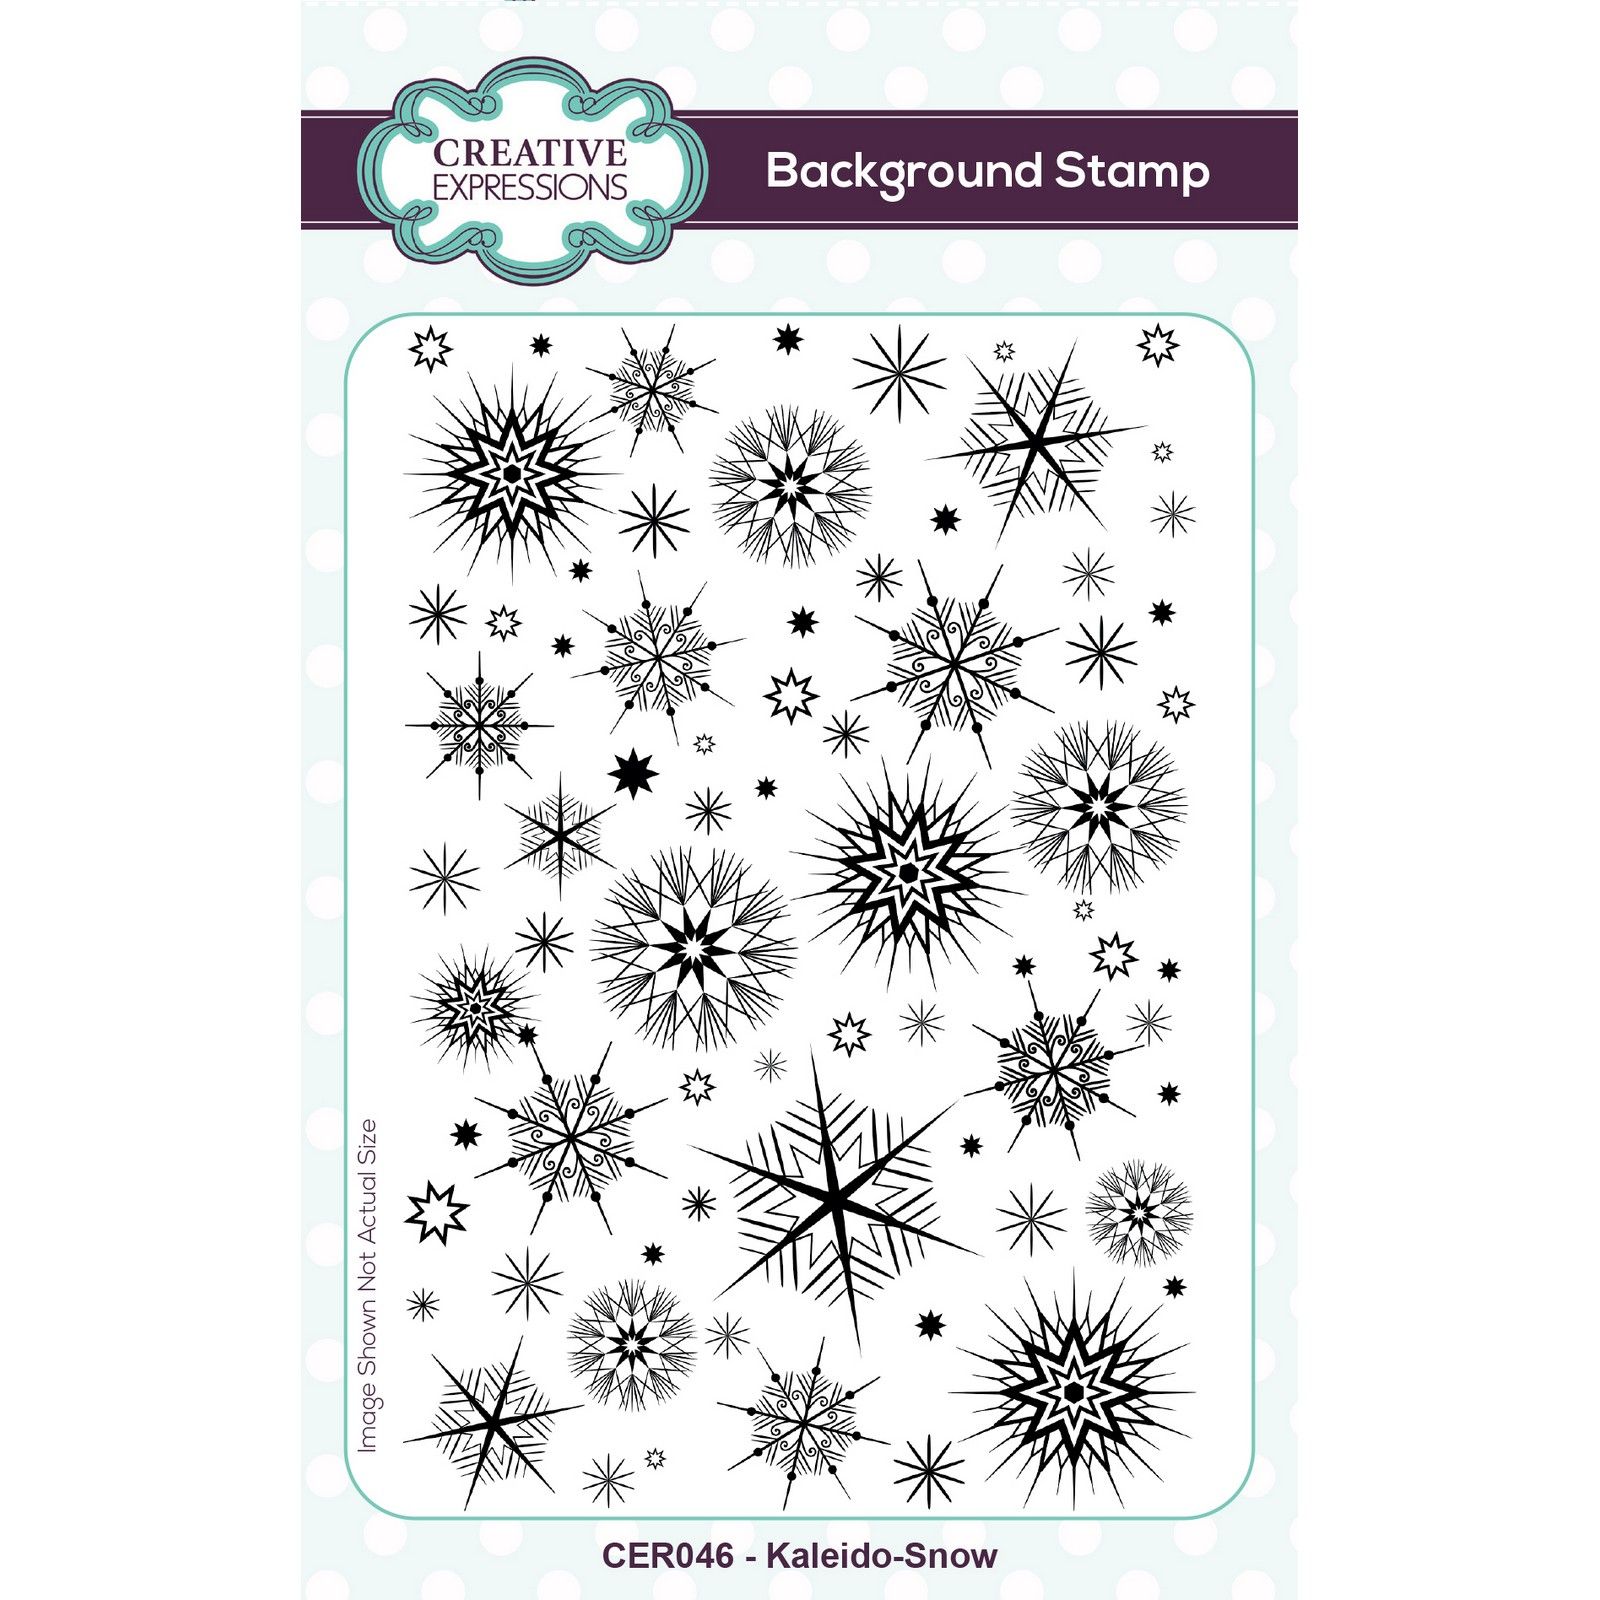 Creative Expressions • Background Stamp Kaleido-Snow